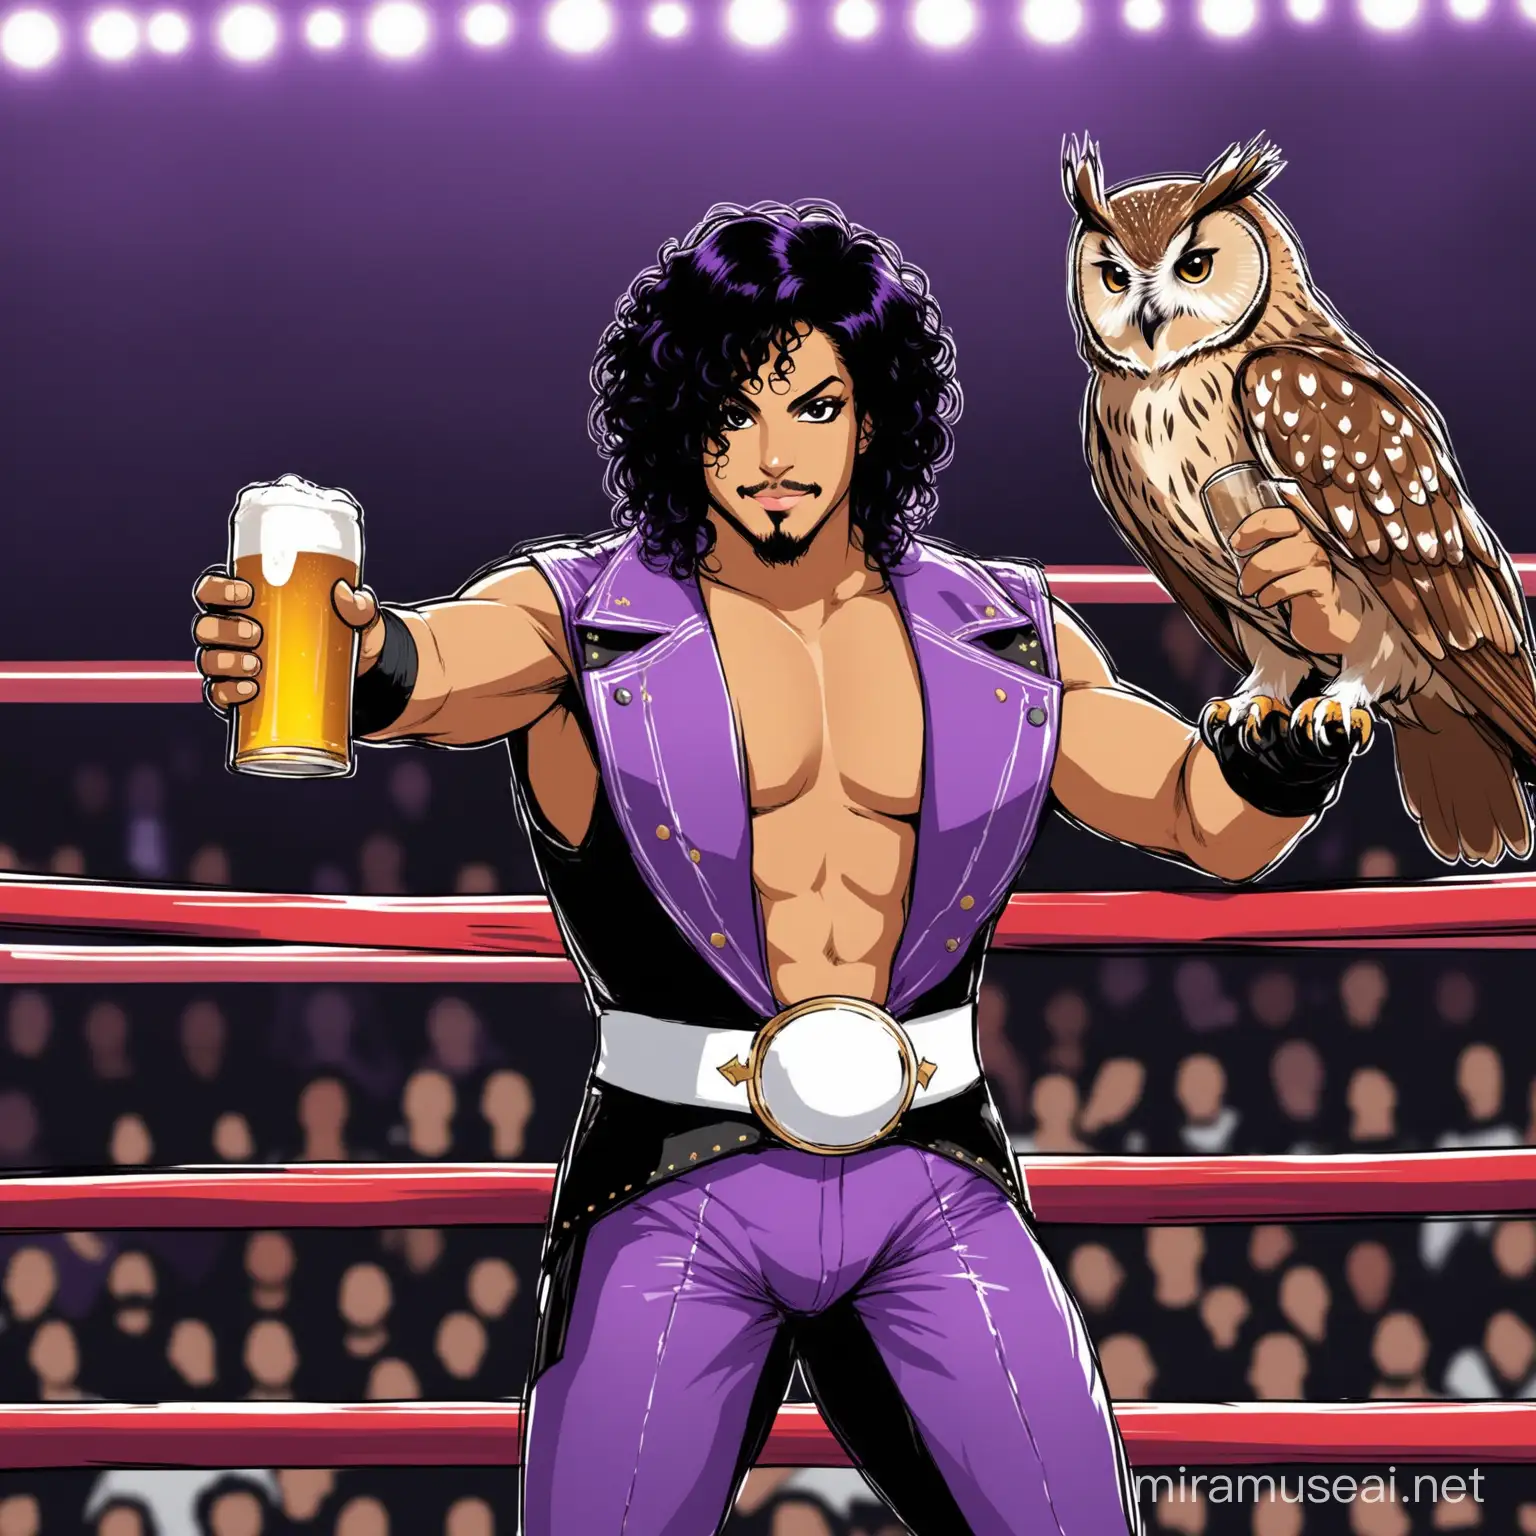 The artist formally known as Prince, with an owl, both drinking beers, in a wrestling ring